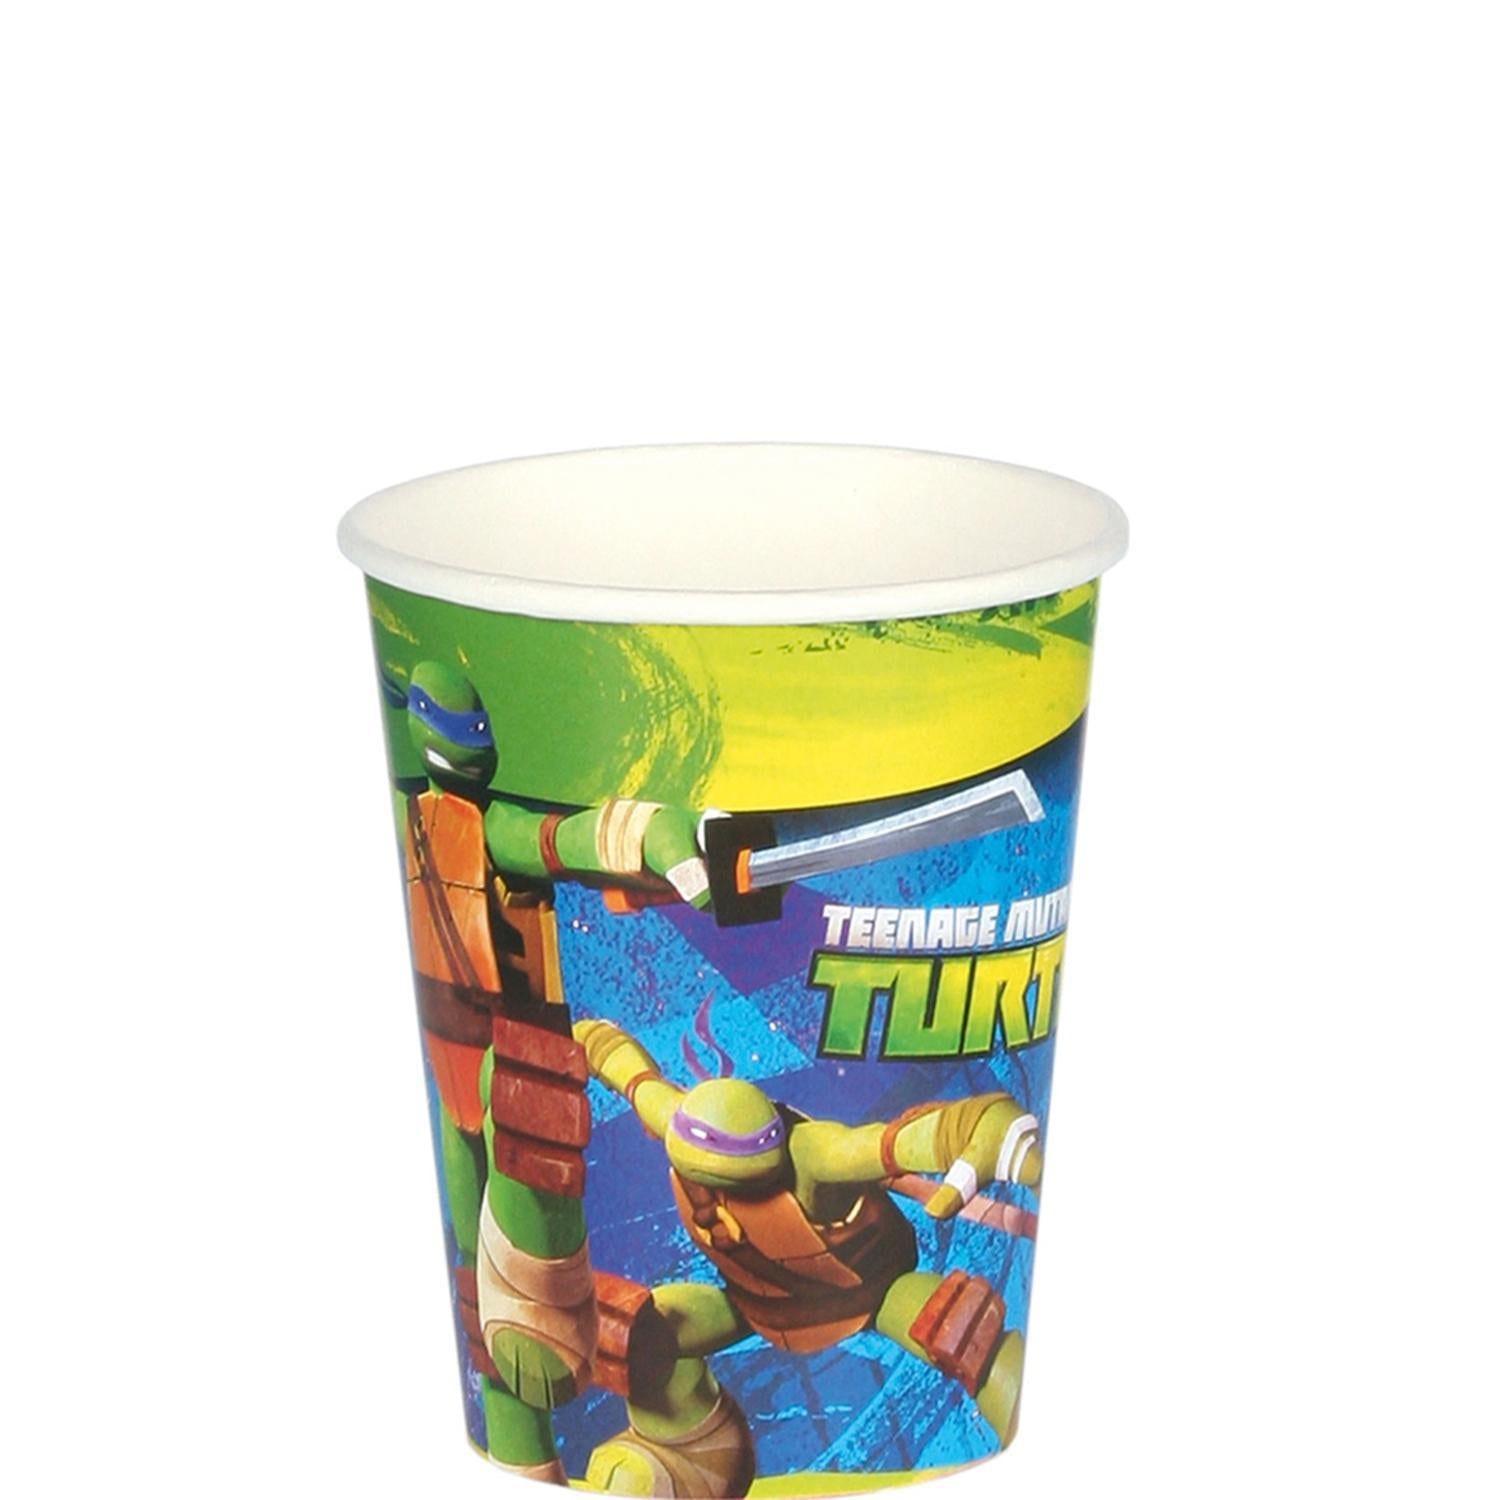 Teenage Mutant Ninja Turtles Cups 8pcs Printed Tableware - Party Centre - Party Centre